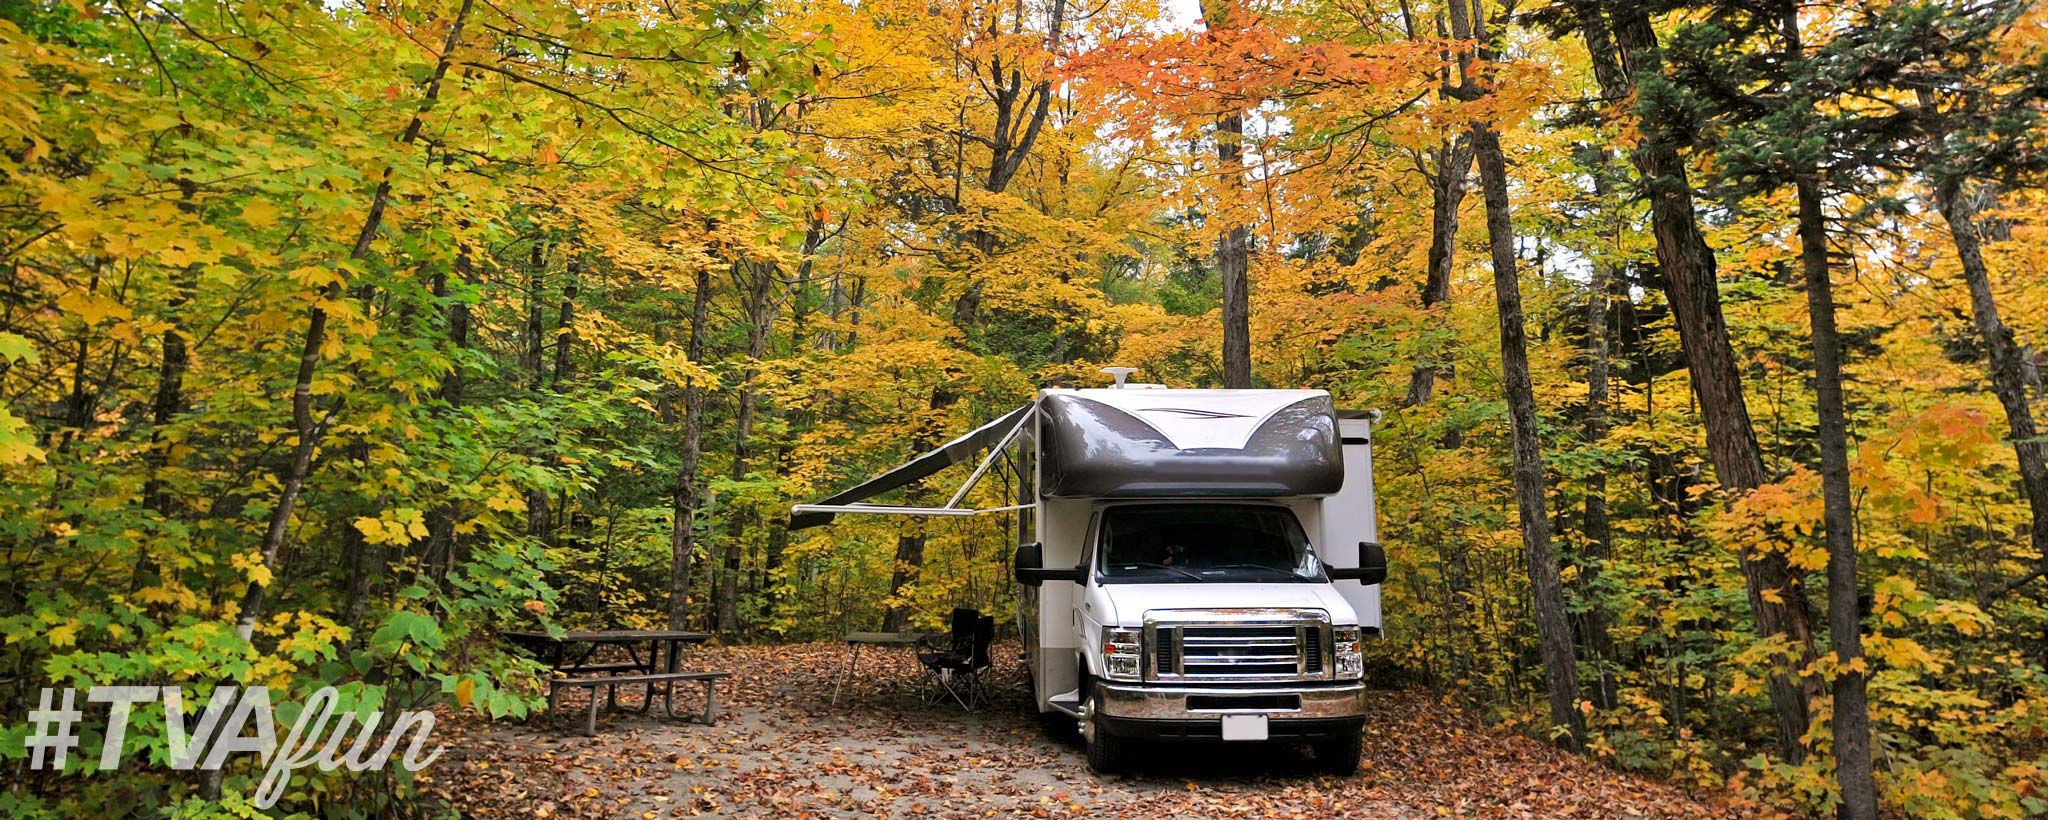 RV in a camping ground